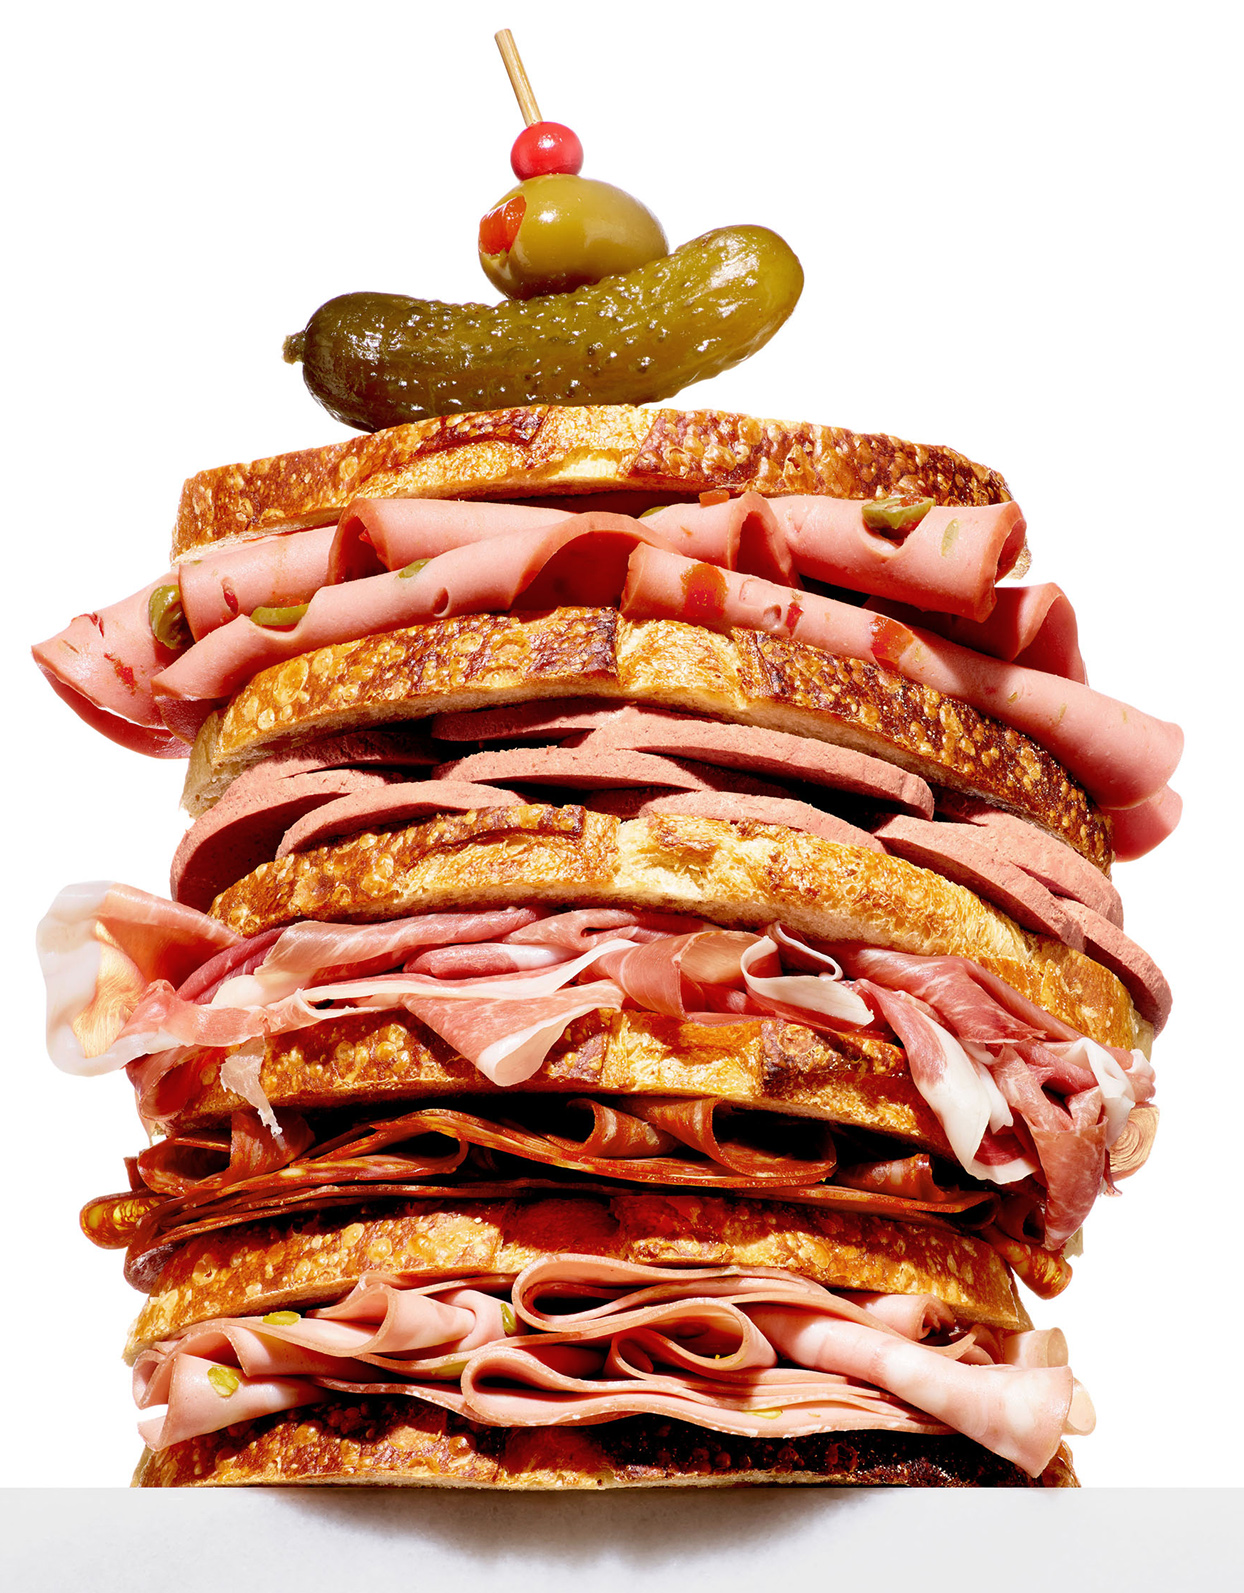 deli meat sandwich stacked high